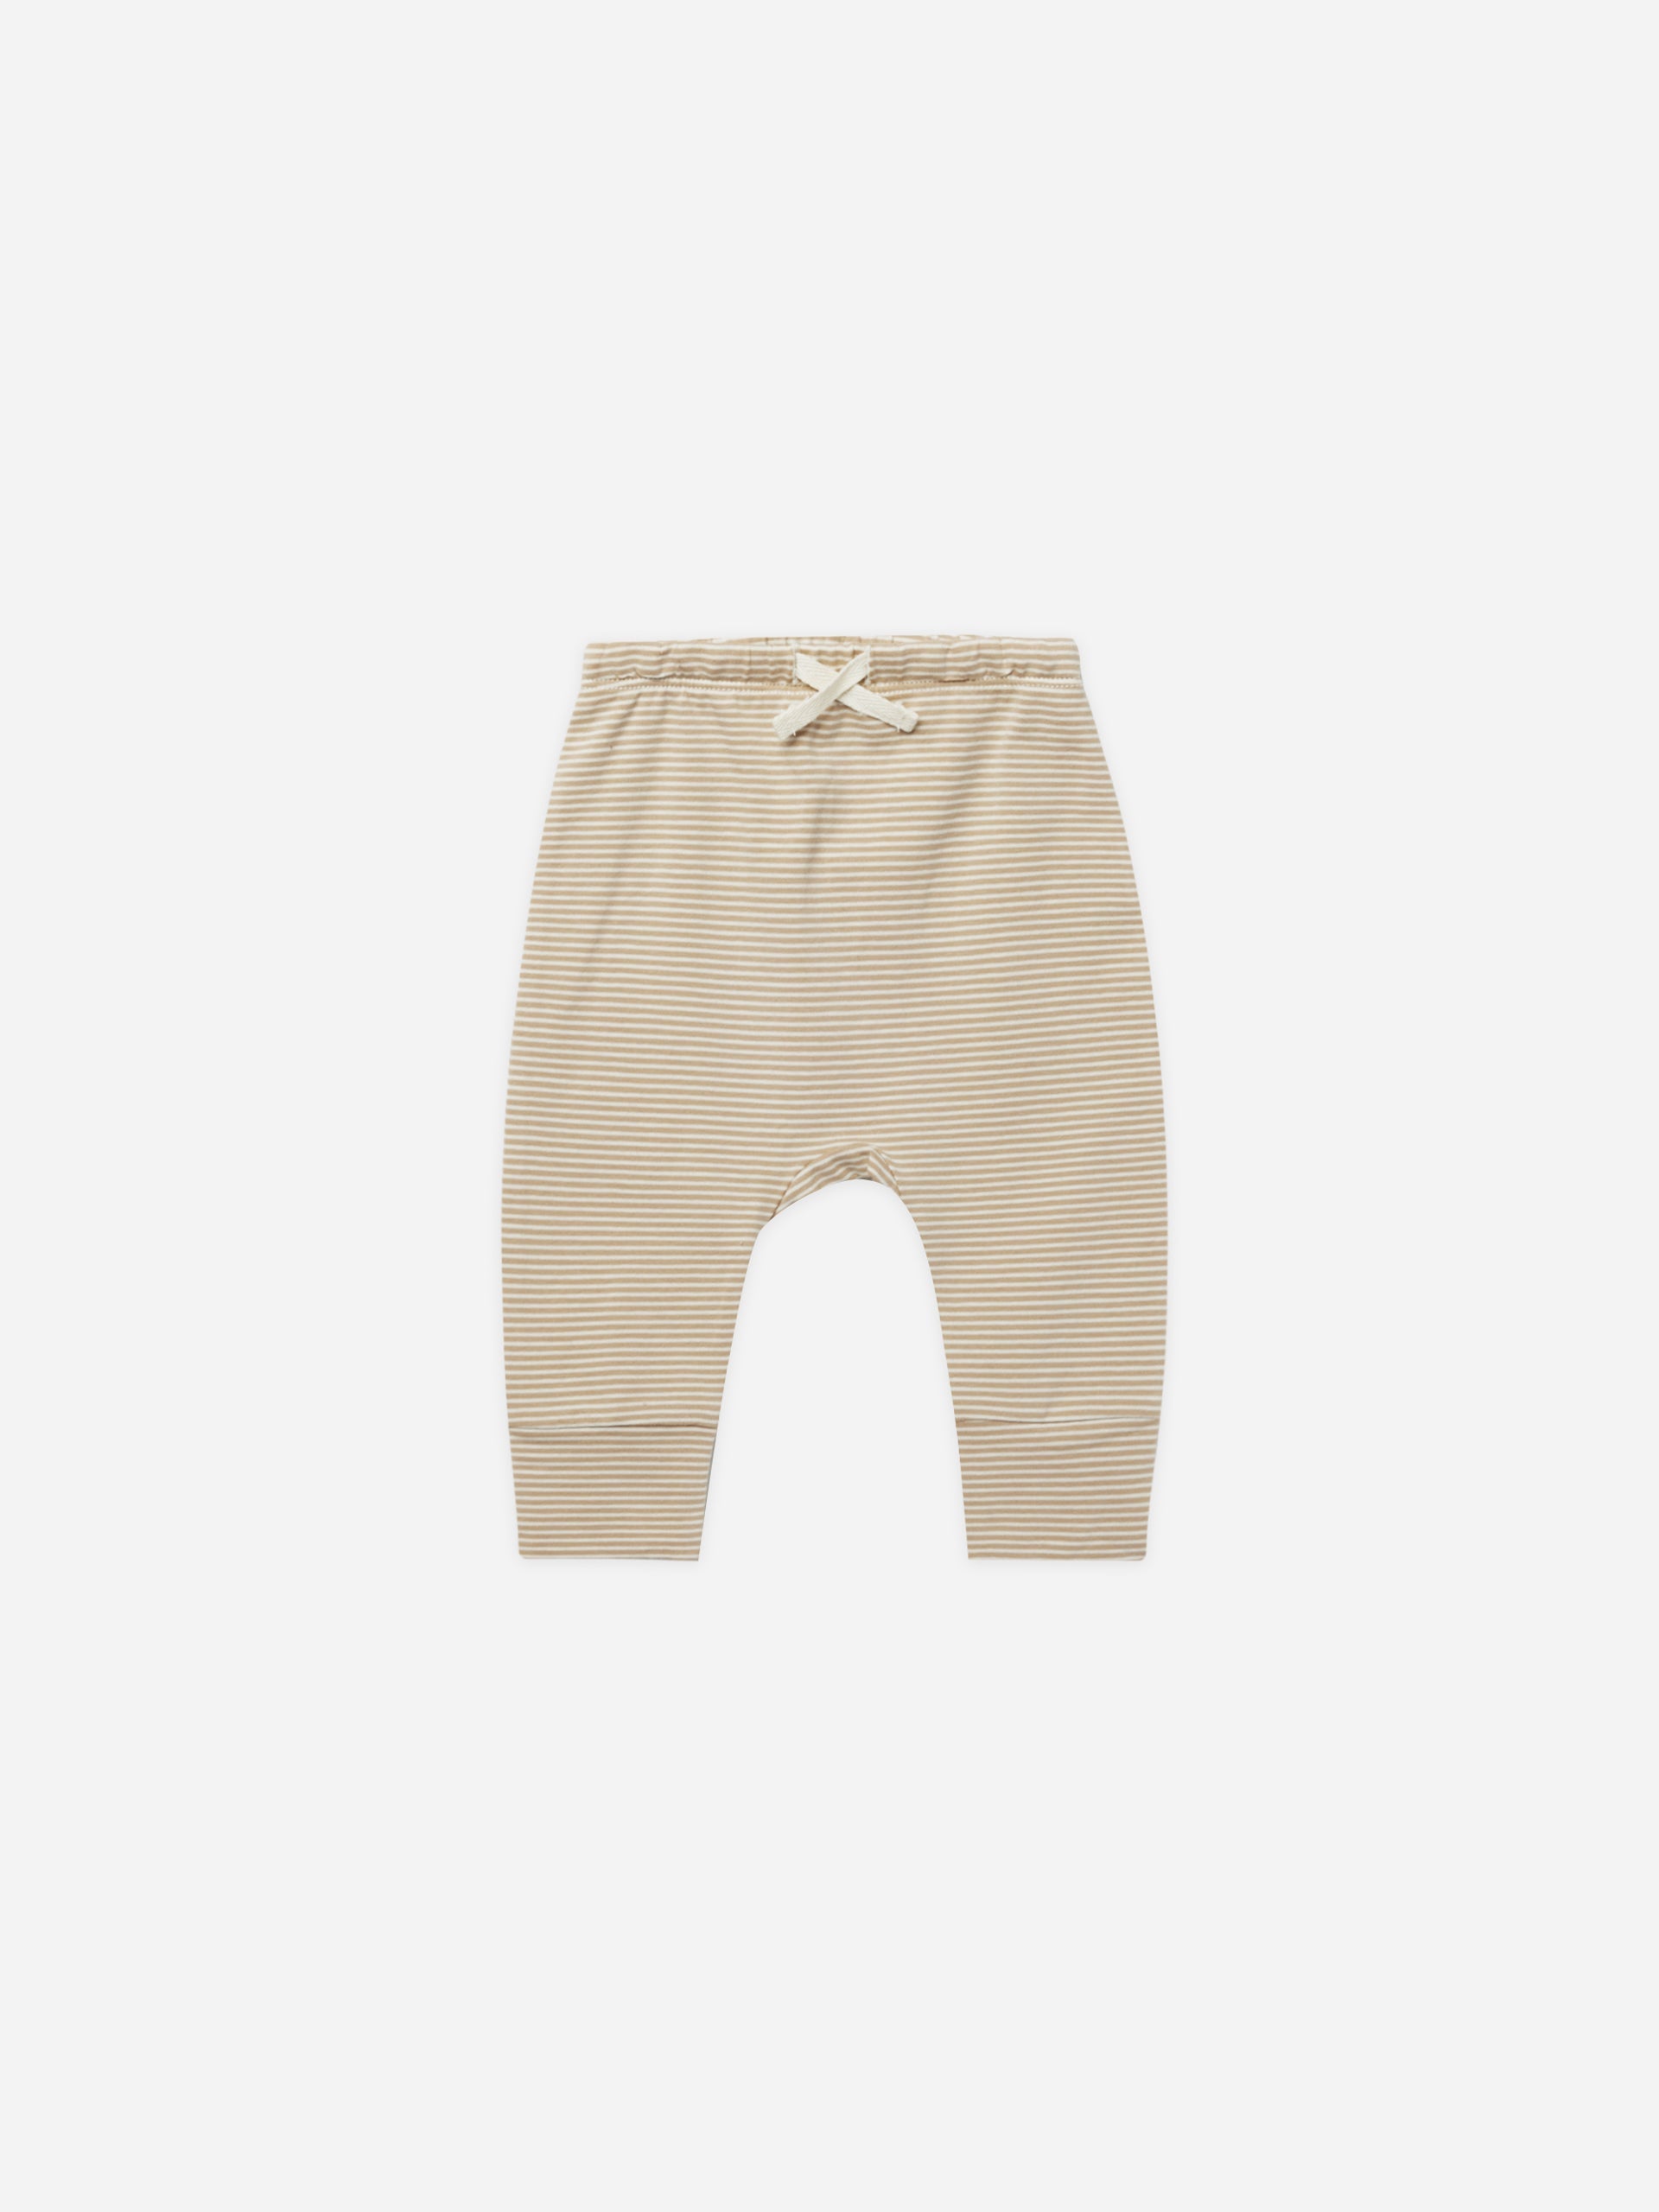 Drawstring Pant || Latte Micro Stripe - Rylee + Cru | Kids Clothes | Trendy Baby Clothes | Modern Infant Outfits |